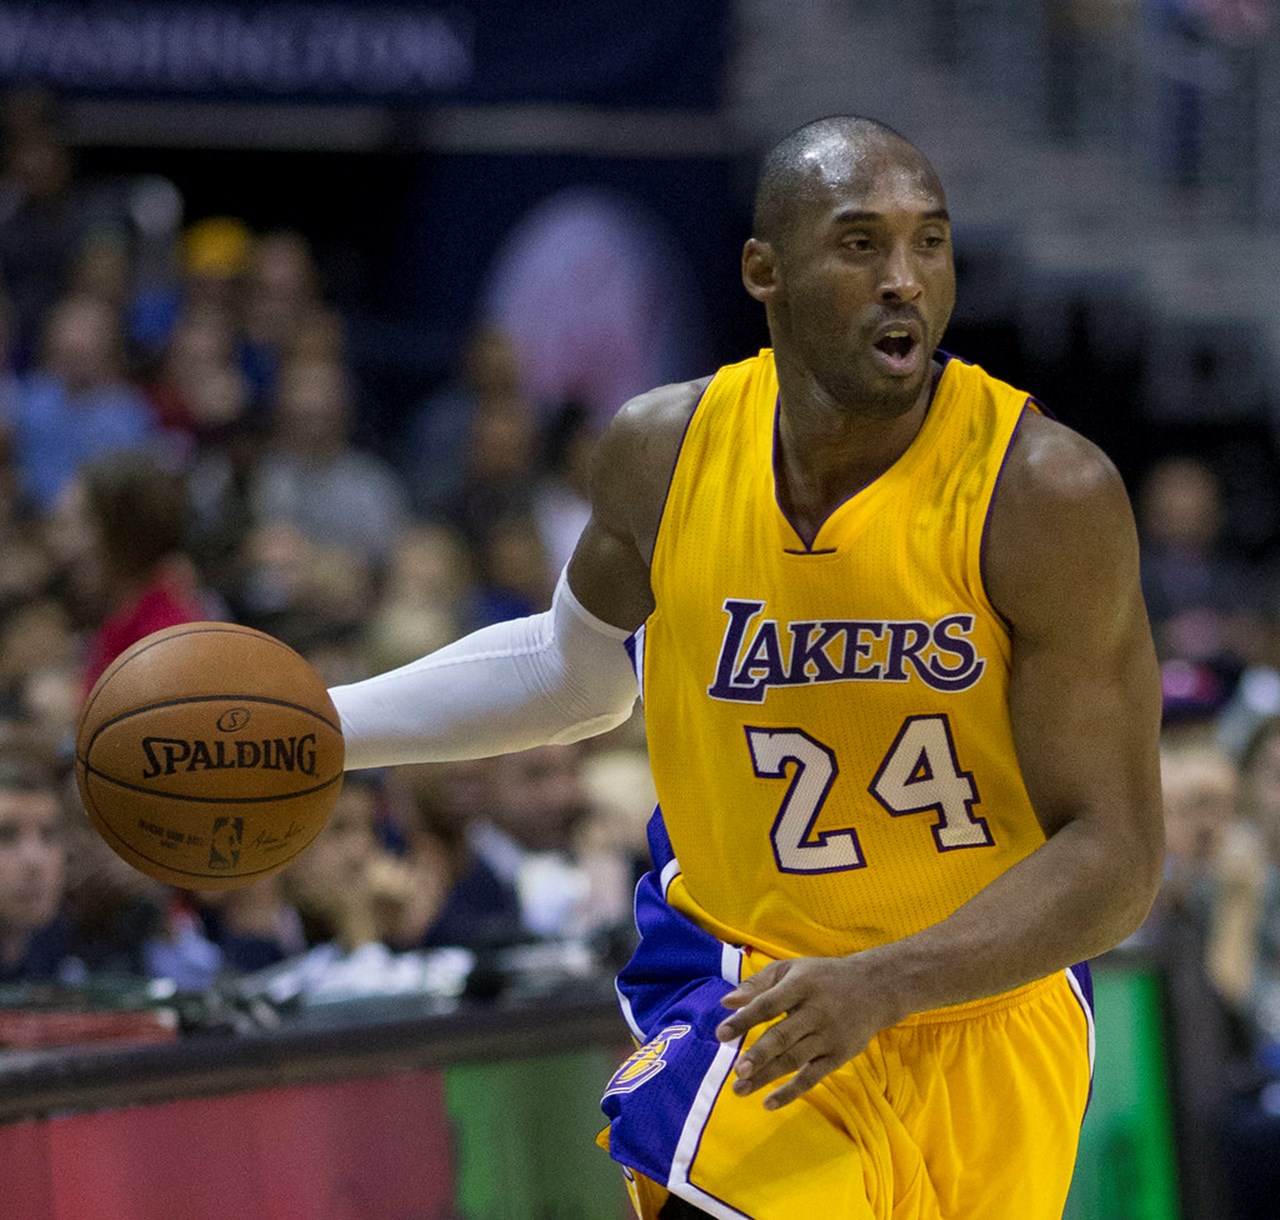 Kobe Bryant Most Valuable NBA Jersey to Auction at Sotheby's